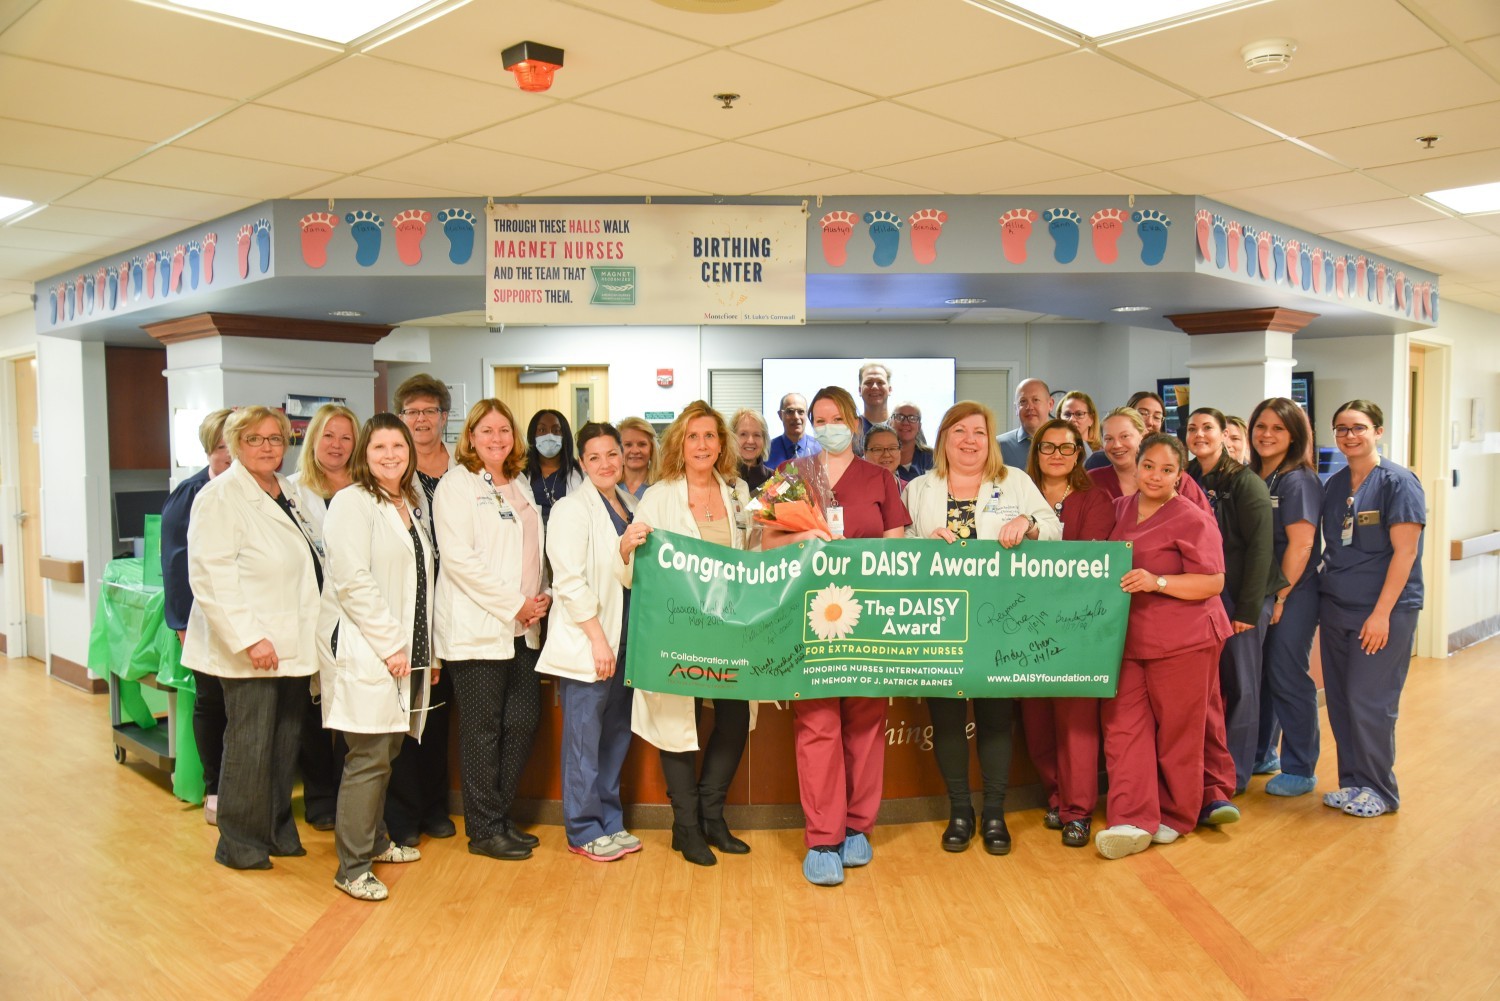 Daisy Award Recognition -Recognizes nurses who exemplify outstanding role models.

